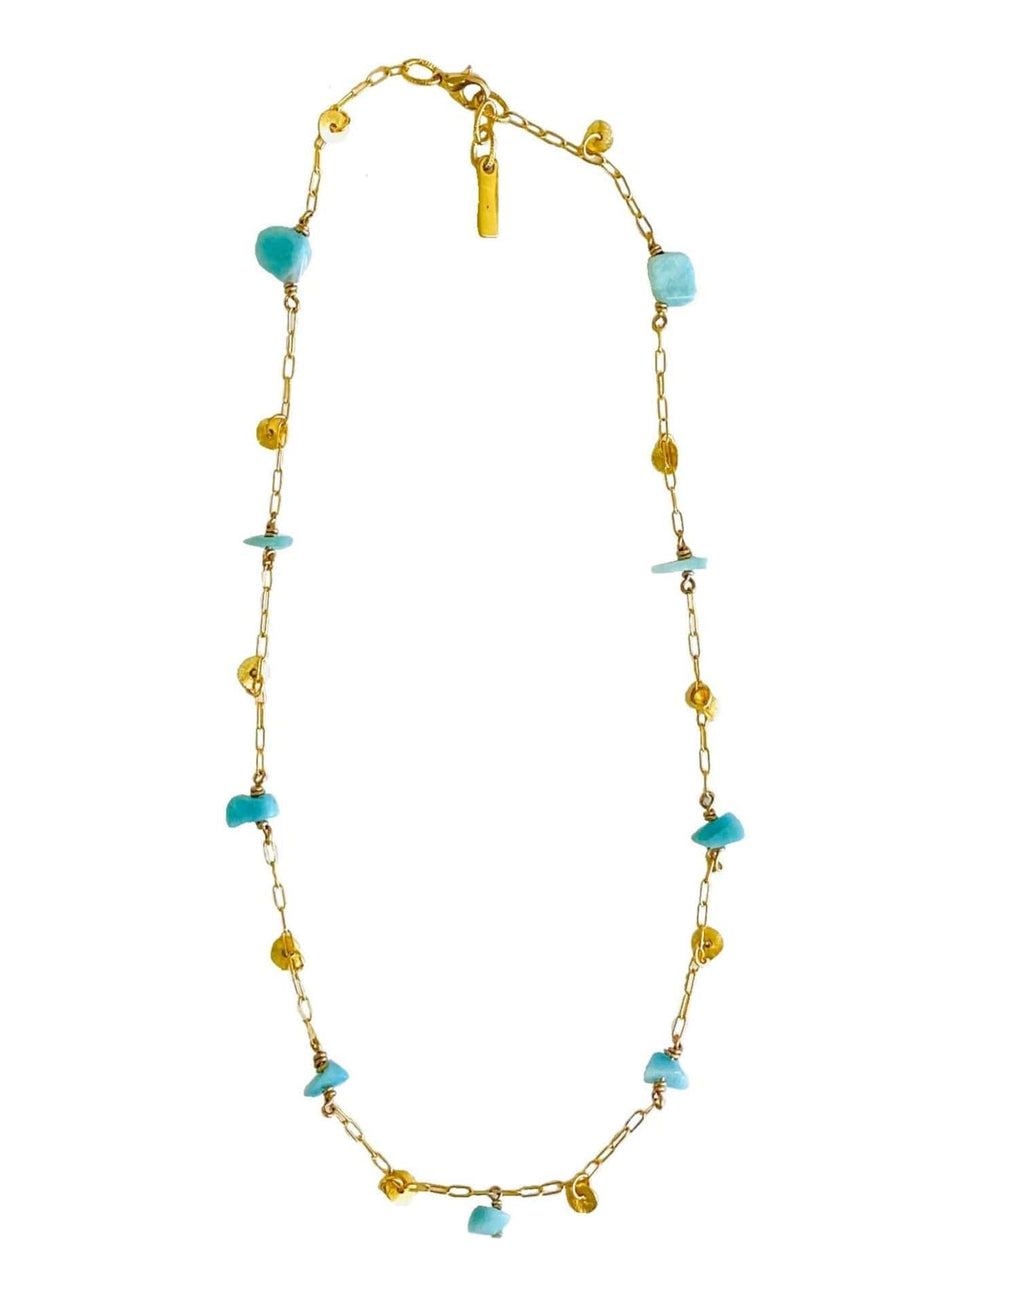 MINU Jewels Necklace Nefatari Short 16-18" Necklace in Amazonite with Gold Plated Accents | MINU